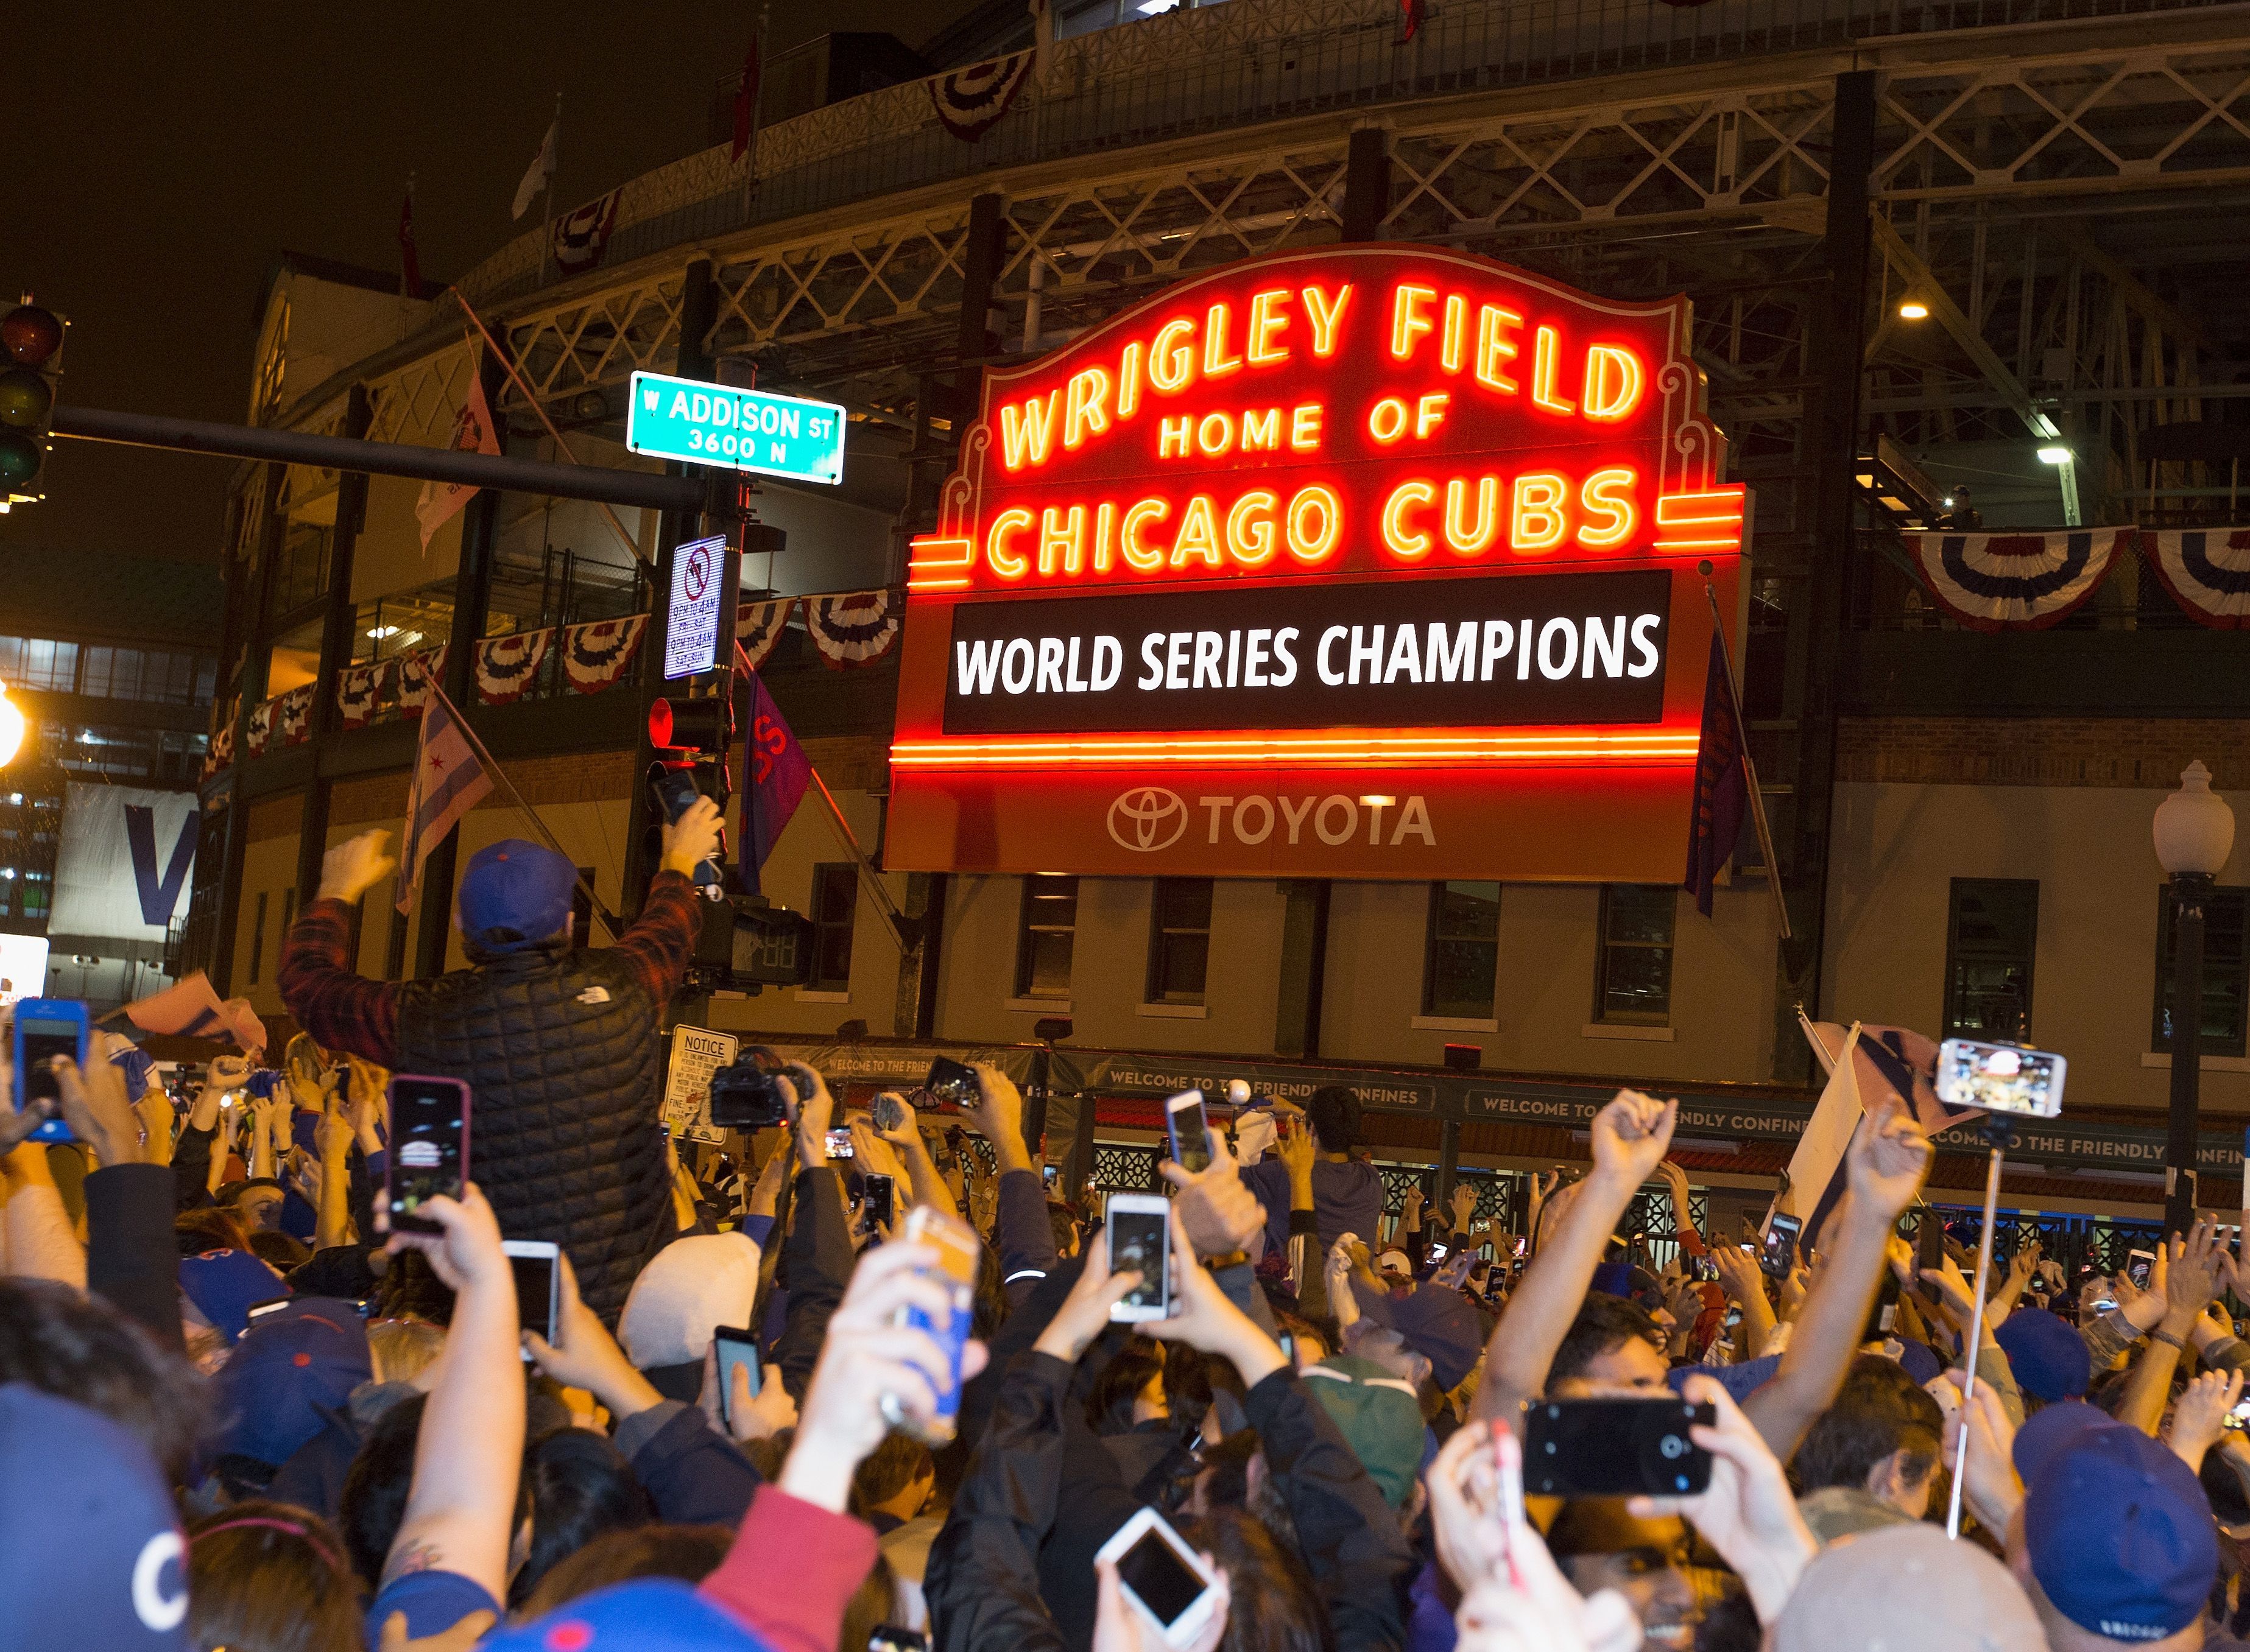 Cubs' Pride Night on June 13 - Windy City Times